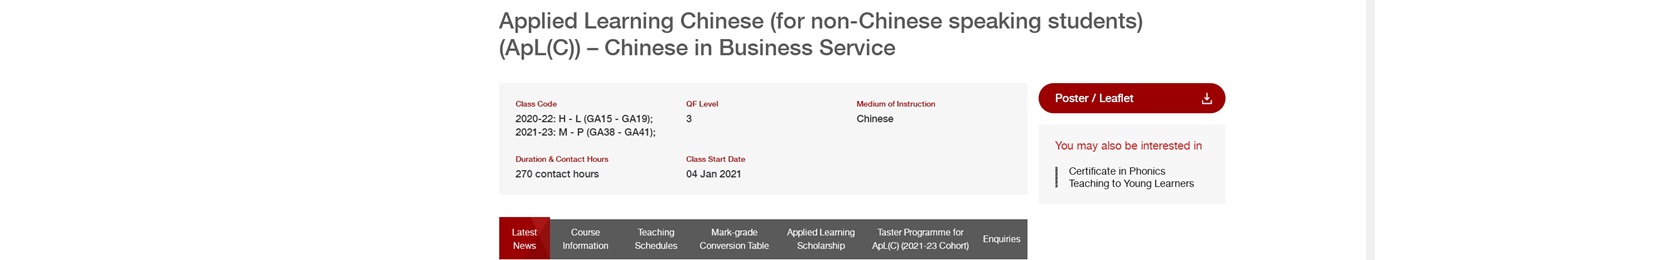 Applied Learning Chinese course E 2050x500